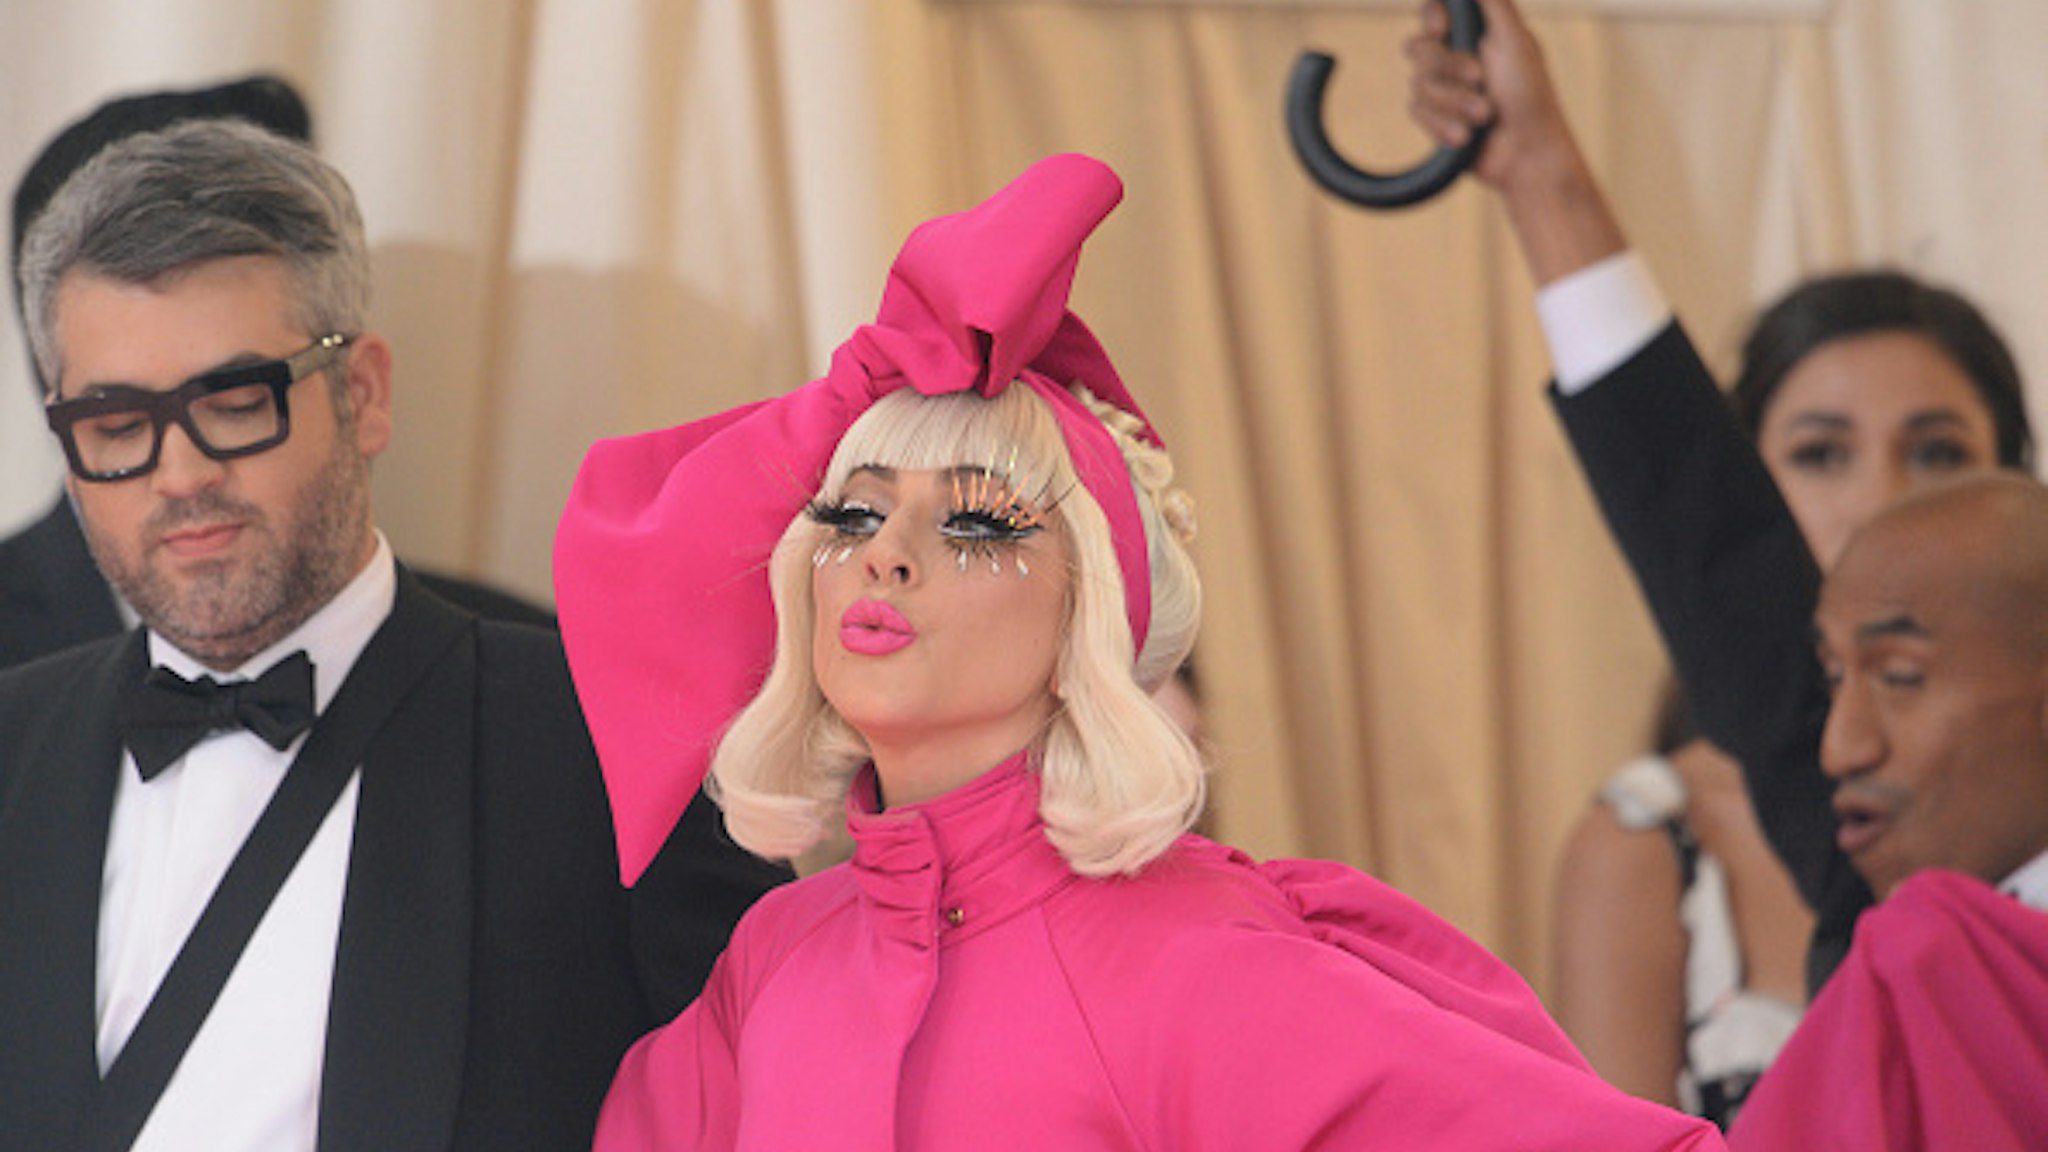 NEW YORK, NY - MAY 06: Singer and actress Lady Gaga attends The 2019 Met Gala Celebrating Camp: Notes on Fashion at the Metropolitan Museum of Art on May 6, 2019 in New York City.